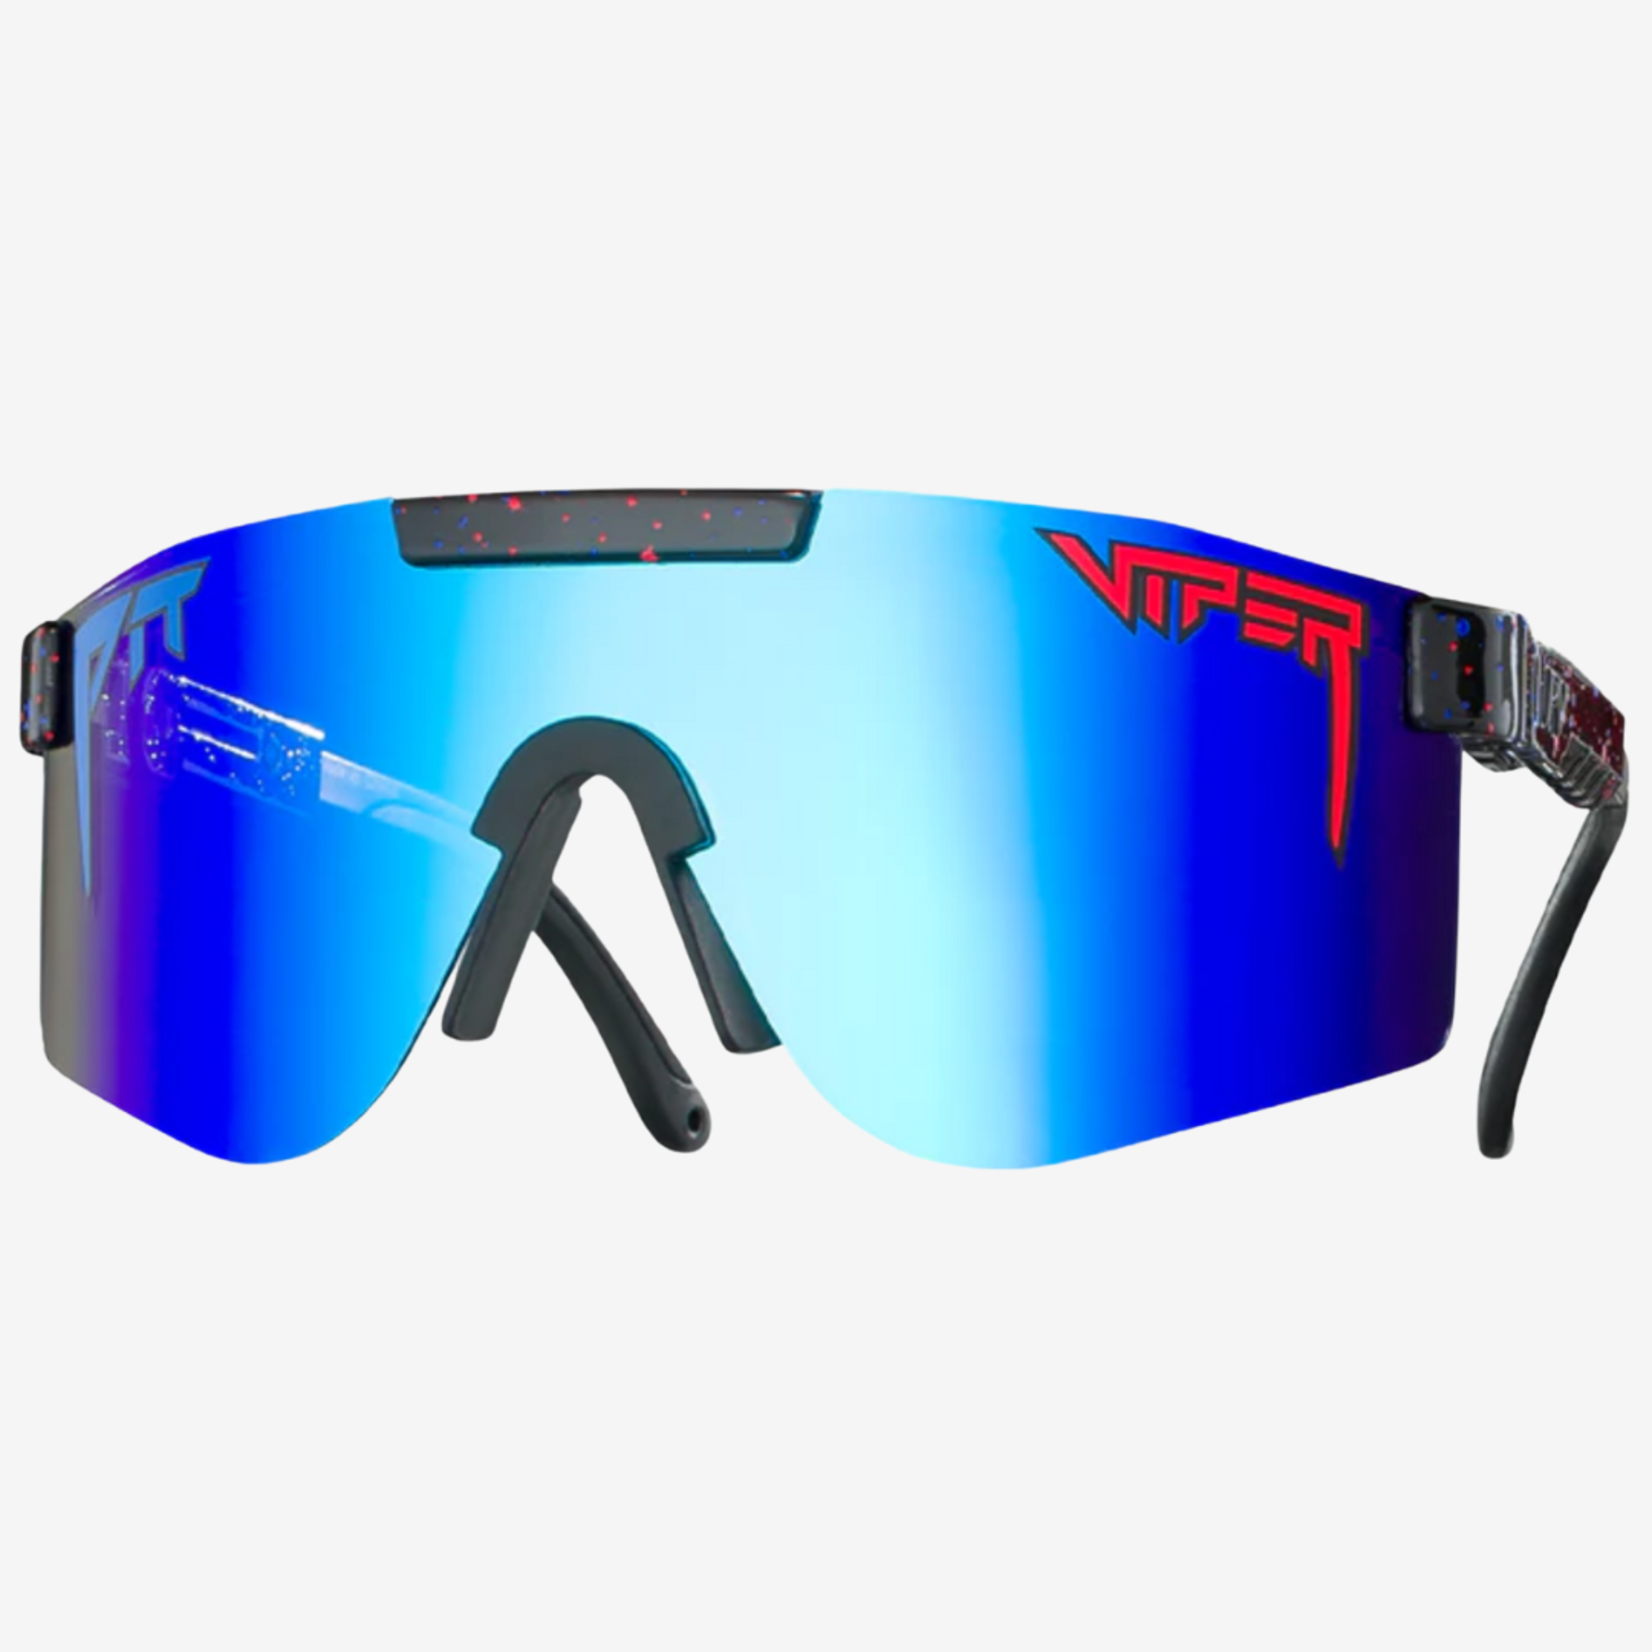 PIT VIPERS ORIGINAL ABSOLUTE LIBERTY POLARIZED SUNGLASSES